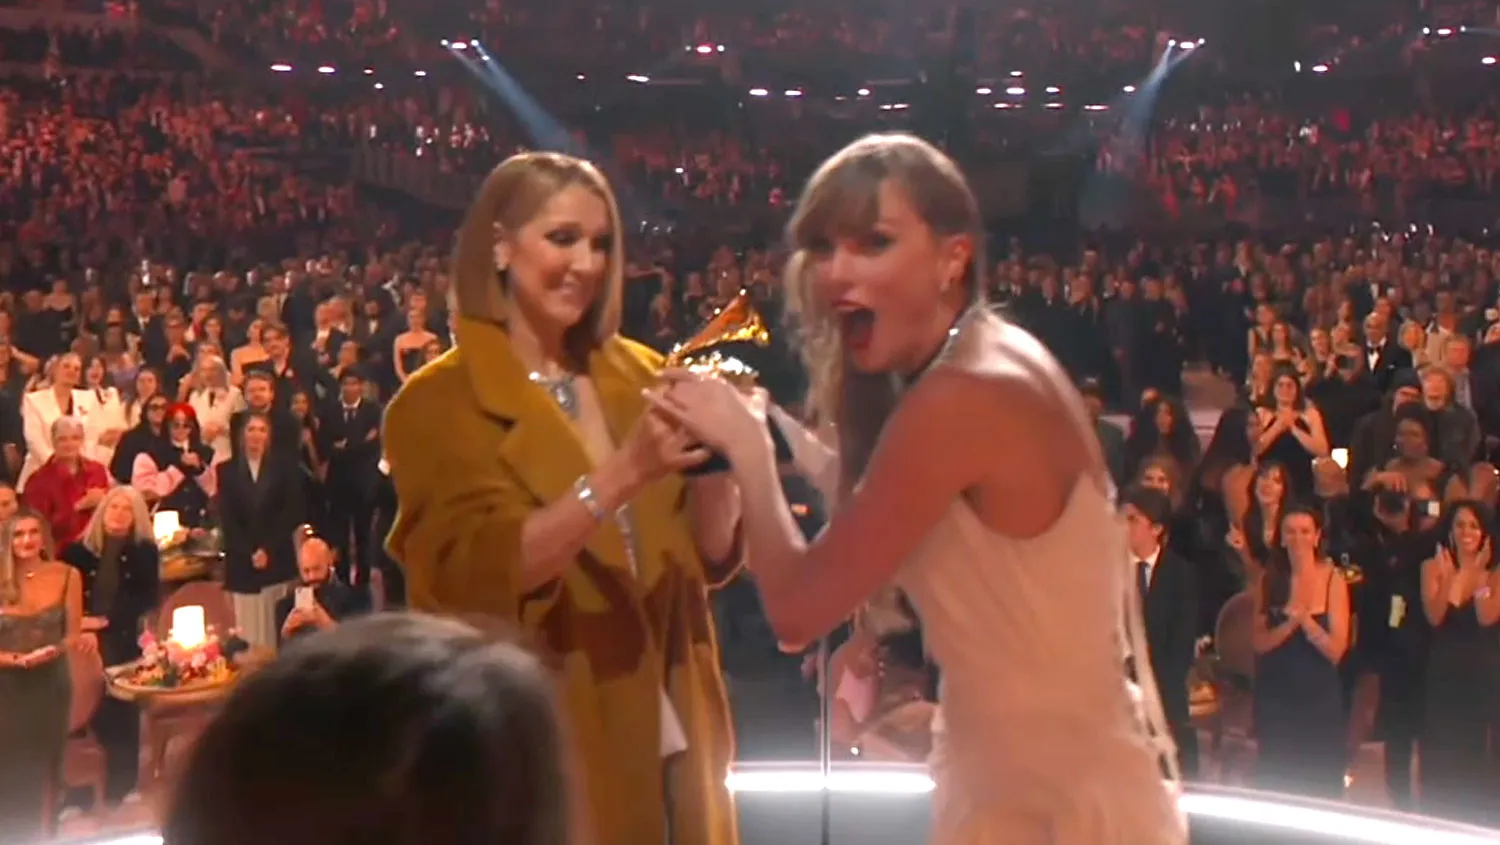 did-taylor-swift-ignore-celine-dion-during-her-acceptance-of-the-album-of-the-year-award-at-grammys-2024